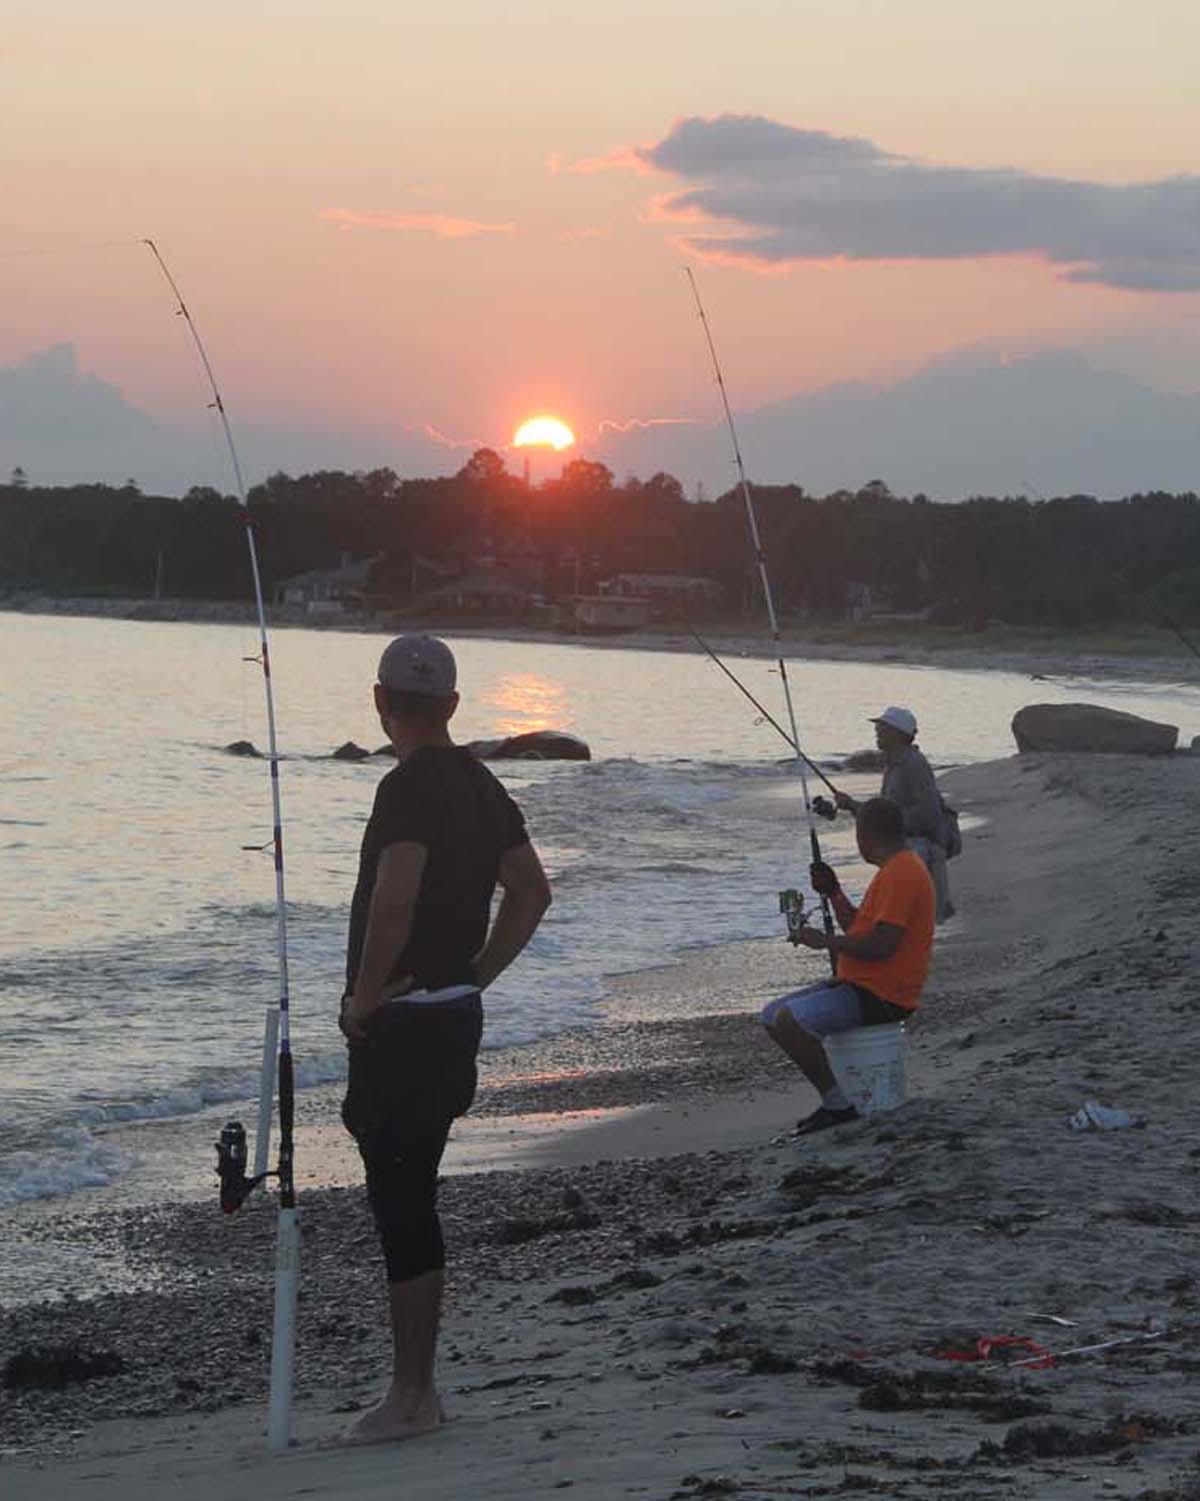 Fishermen with surf-casting poles watch the setting sun from the beach at Harkness Memorial State Park in Waterford on Aug. 22.